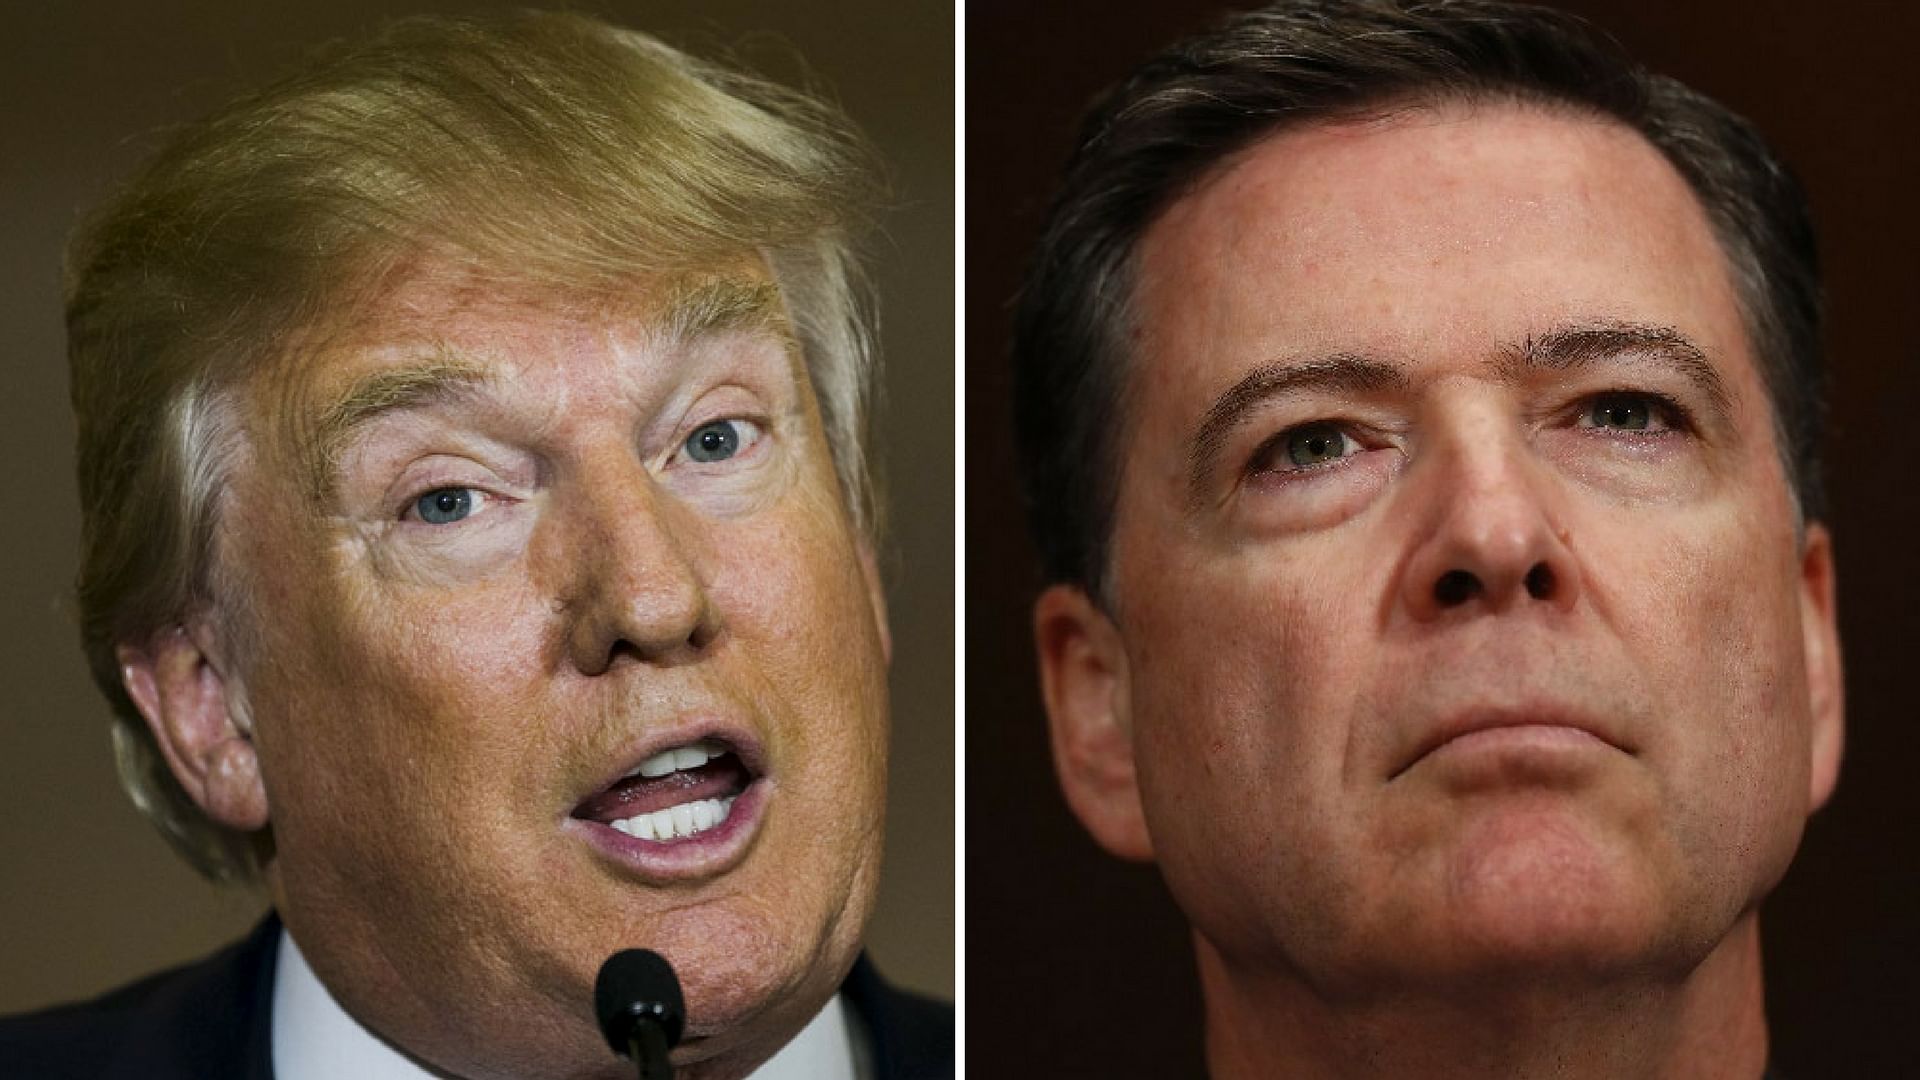 

US President Donald Trump and former FBI Director James Comey. (Photo: Reuters)